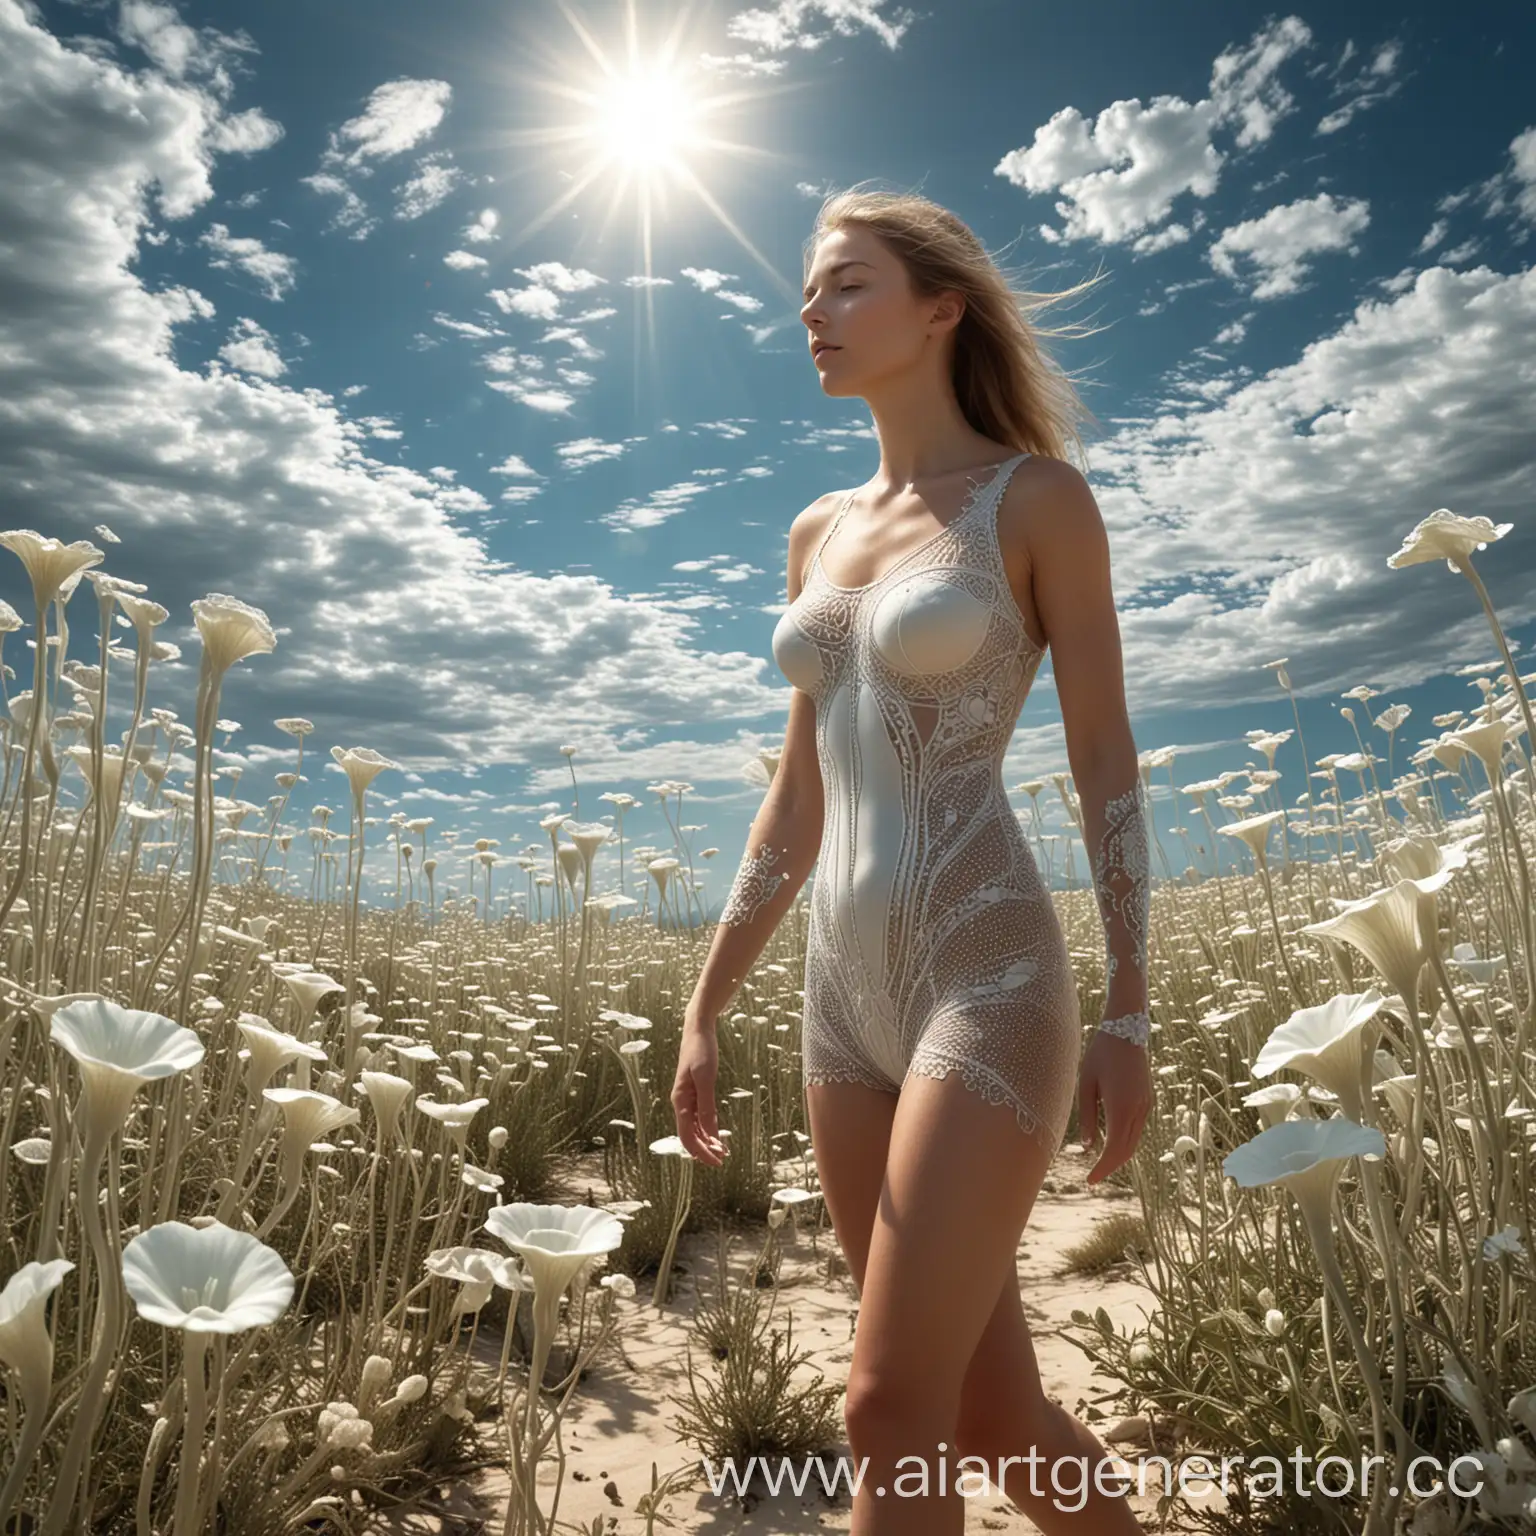 The sky is clear, a few clouds can be seen, A strong summer wind bends the plants of an alien landscape of enlarged Fractals, Diatoms and mostly distorted Radiolara, real look hand,longger straight leg beauty woman, Add some discrete places in the foreground for people to add later, Show depth,